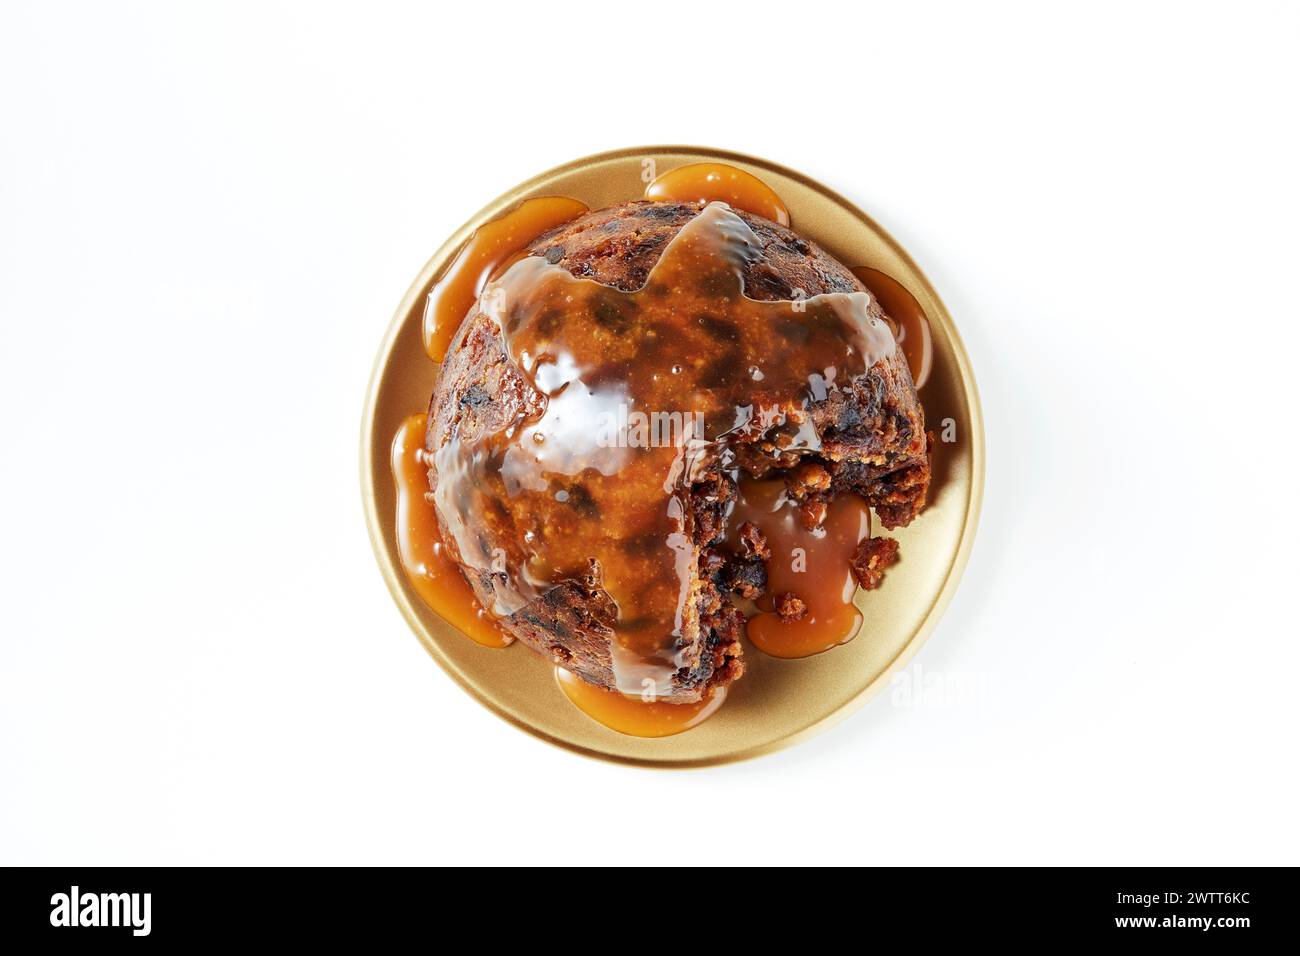 A scrumptious chocolate cake topped with gooey caramel sauce on a golden plate. Stock Photo